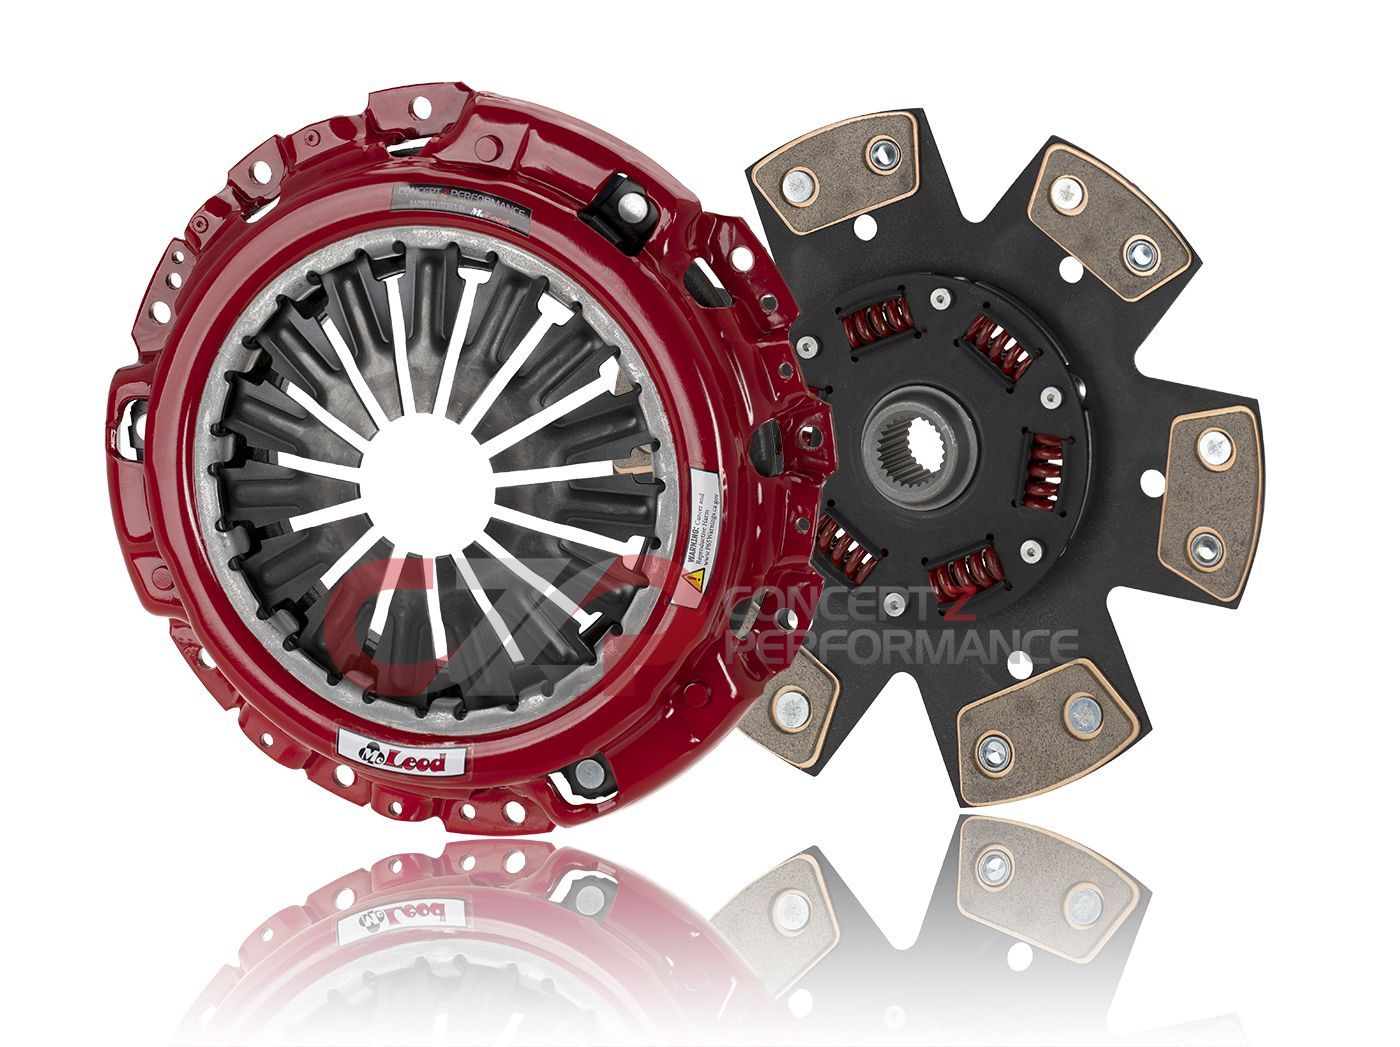 McLeod Racing Stage 2 Supremacy Street Power 6-Puck Carbotic Clutch Kit - Nissan 350Z 03-06 Z33